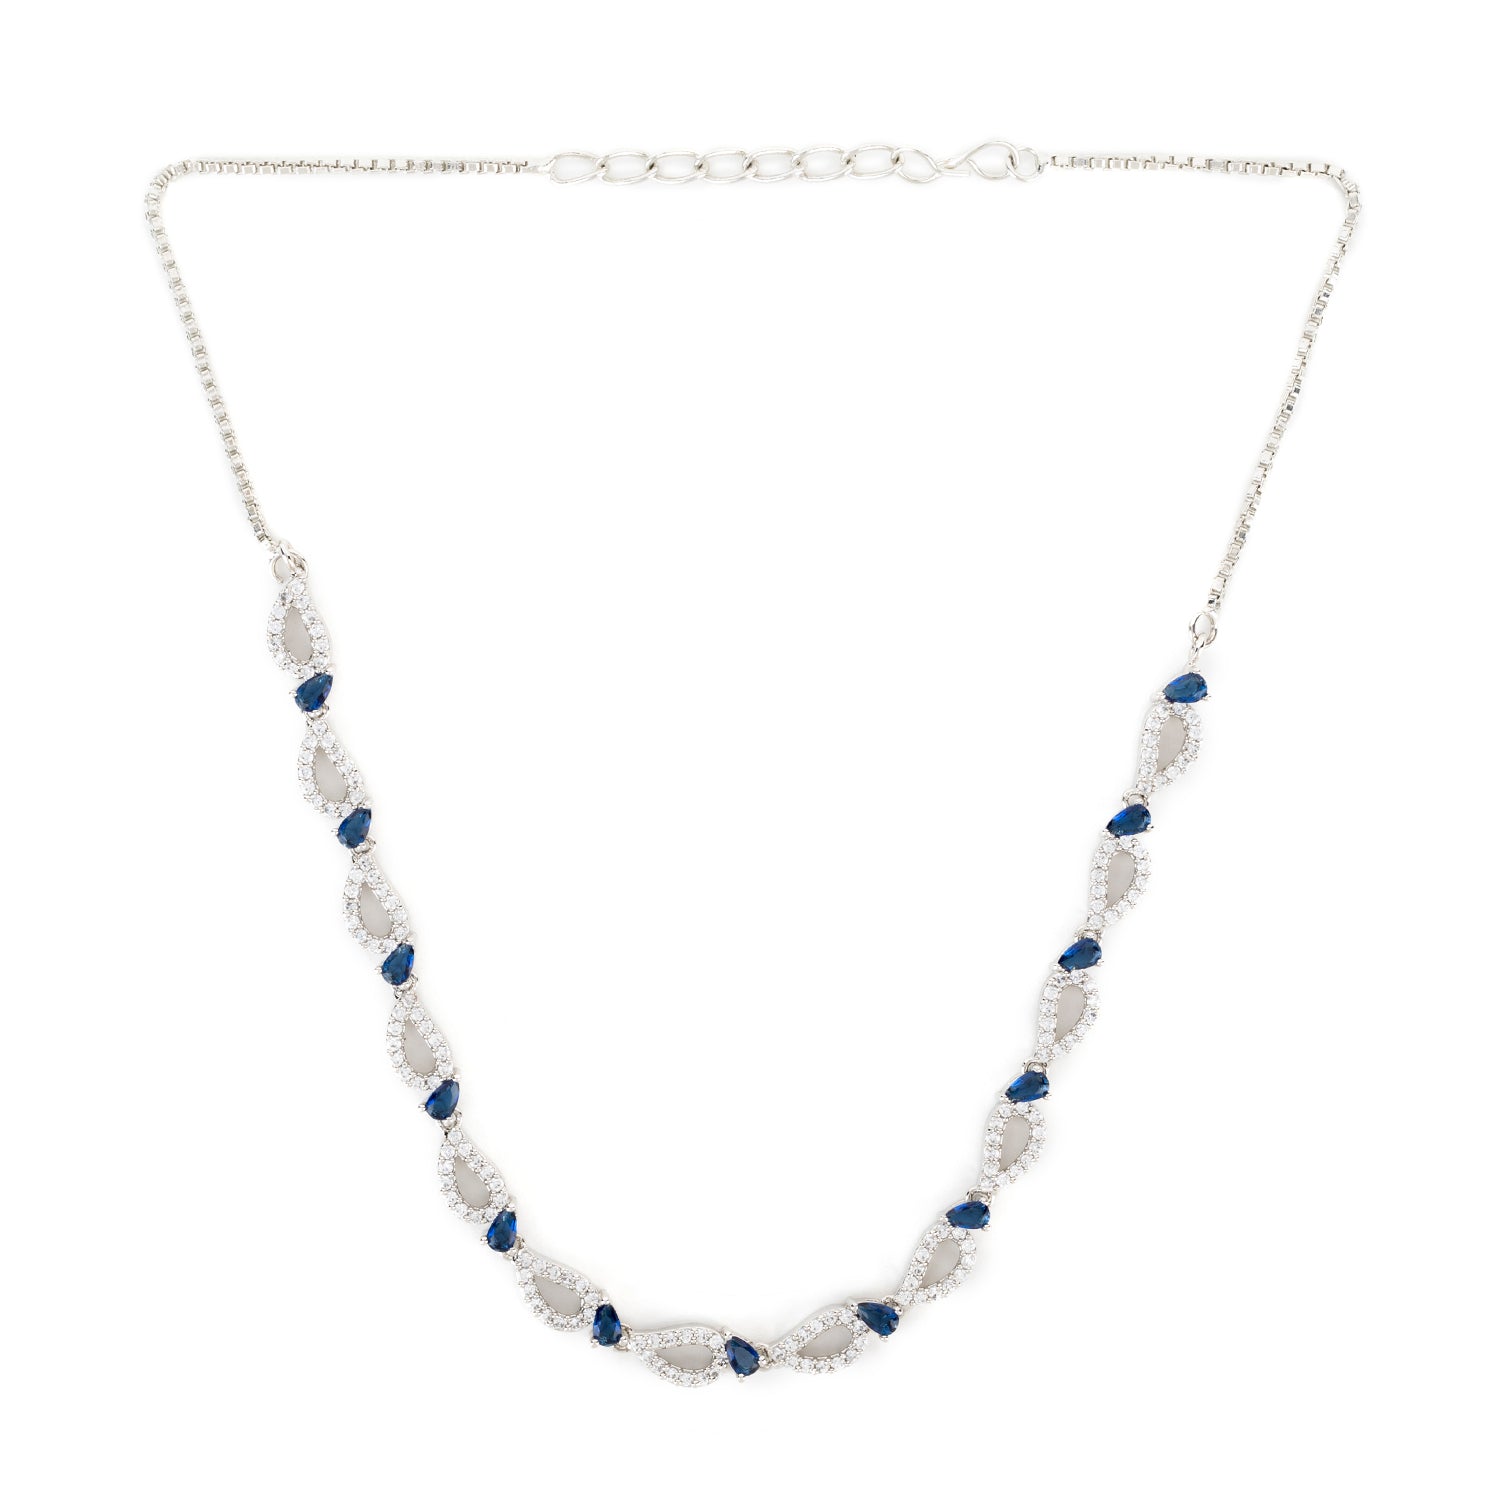 Sapphire Necklace | September Birthstone | 1 1/2ct Oval Sapphire Necklace  In Sterling Silver | SuperJeweler